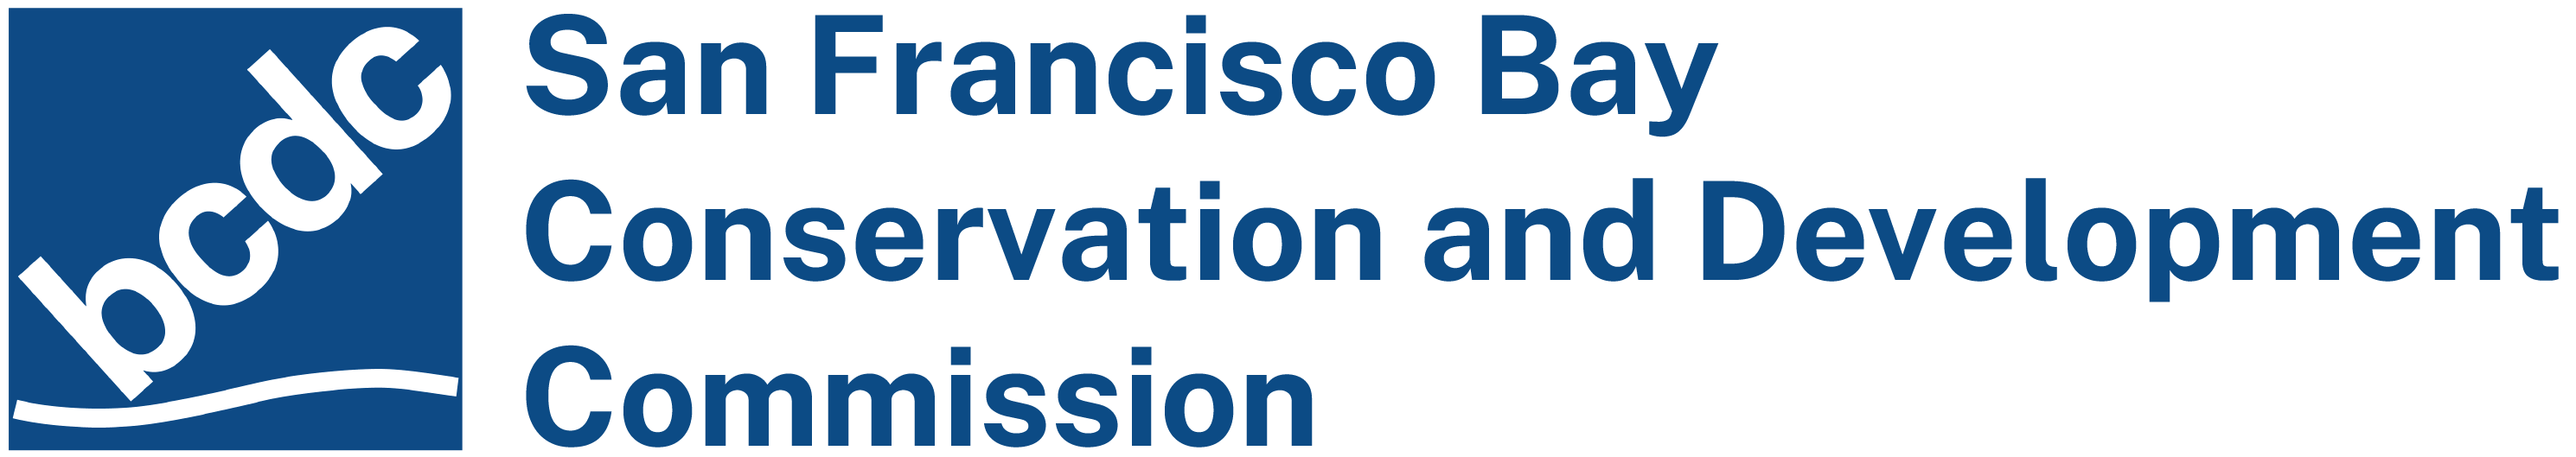 Logo of San Francisco Bay Conservation and Development Commission